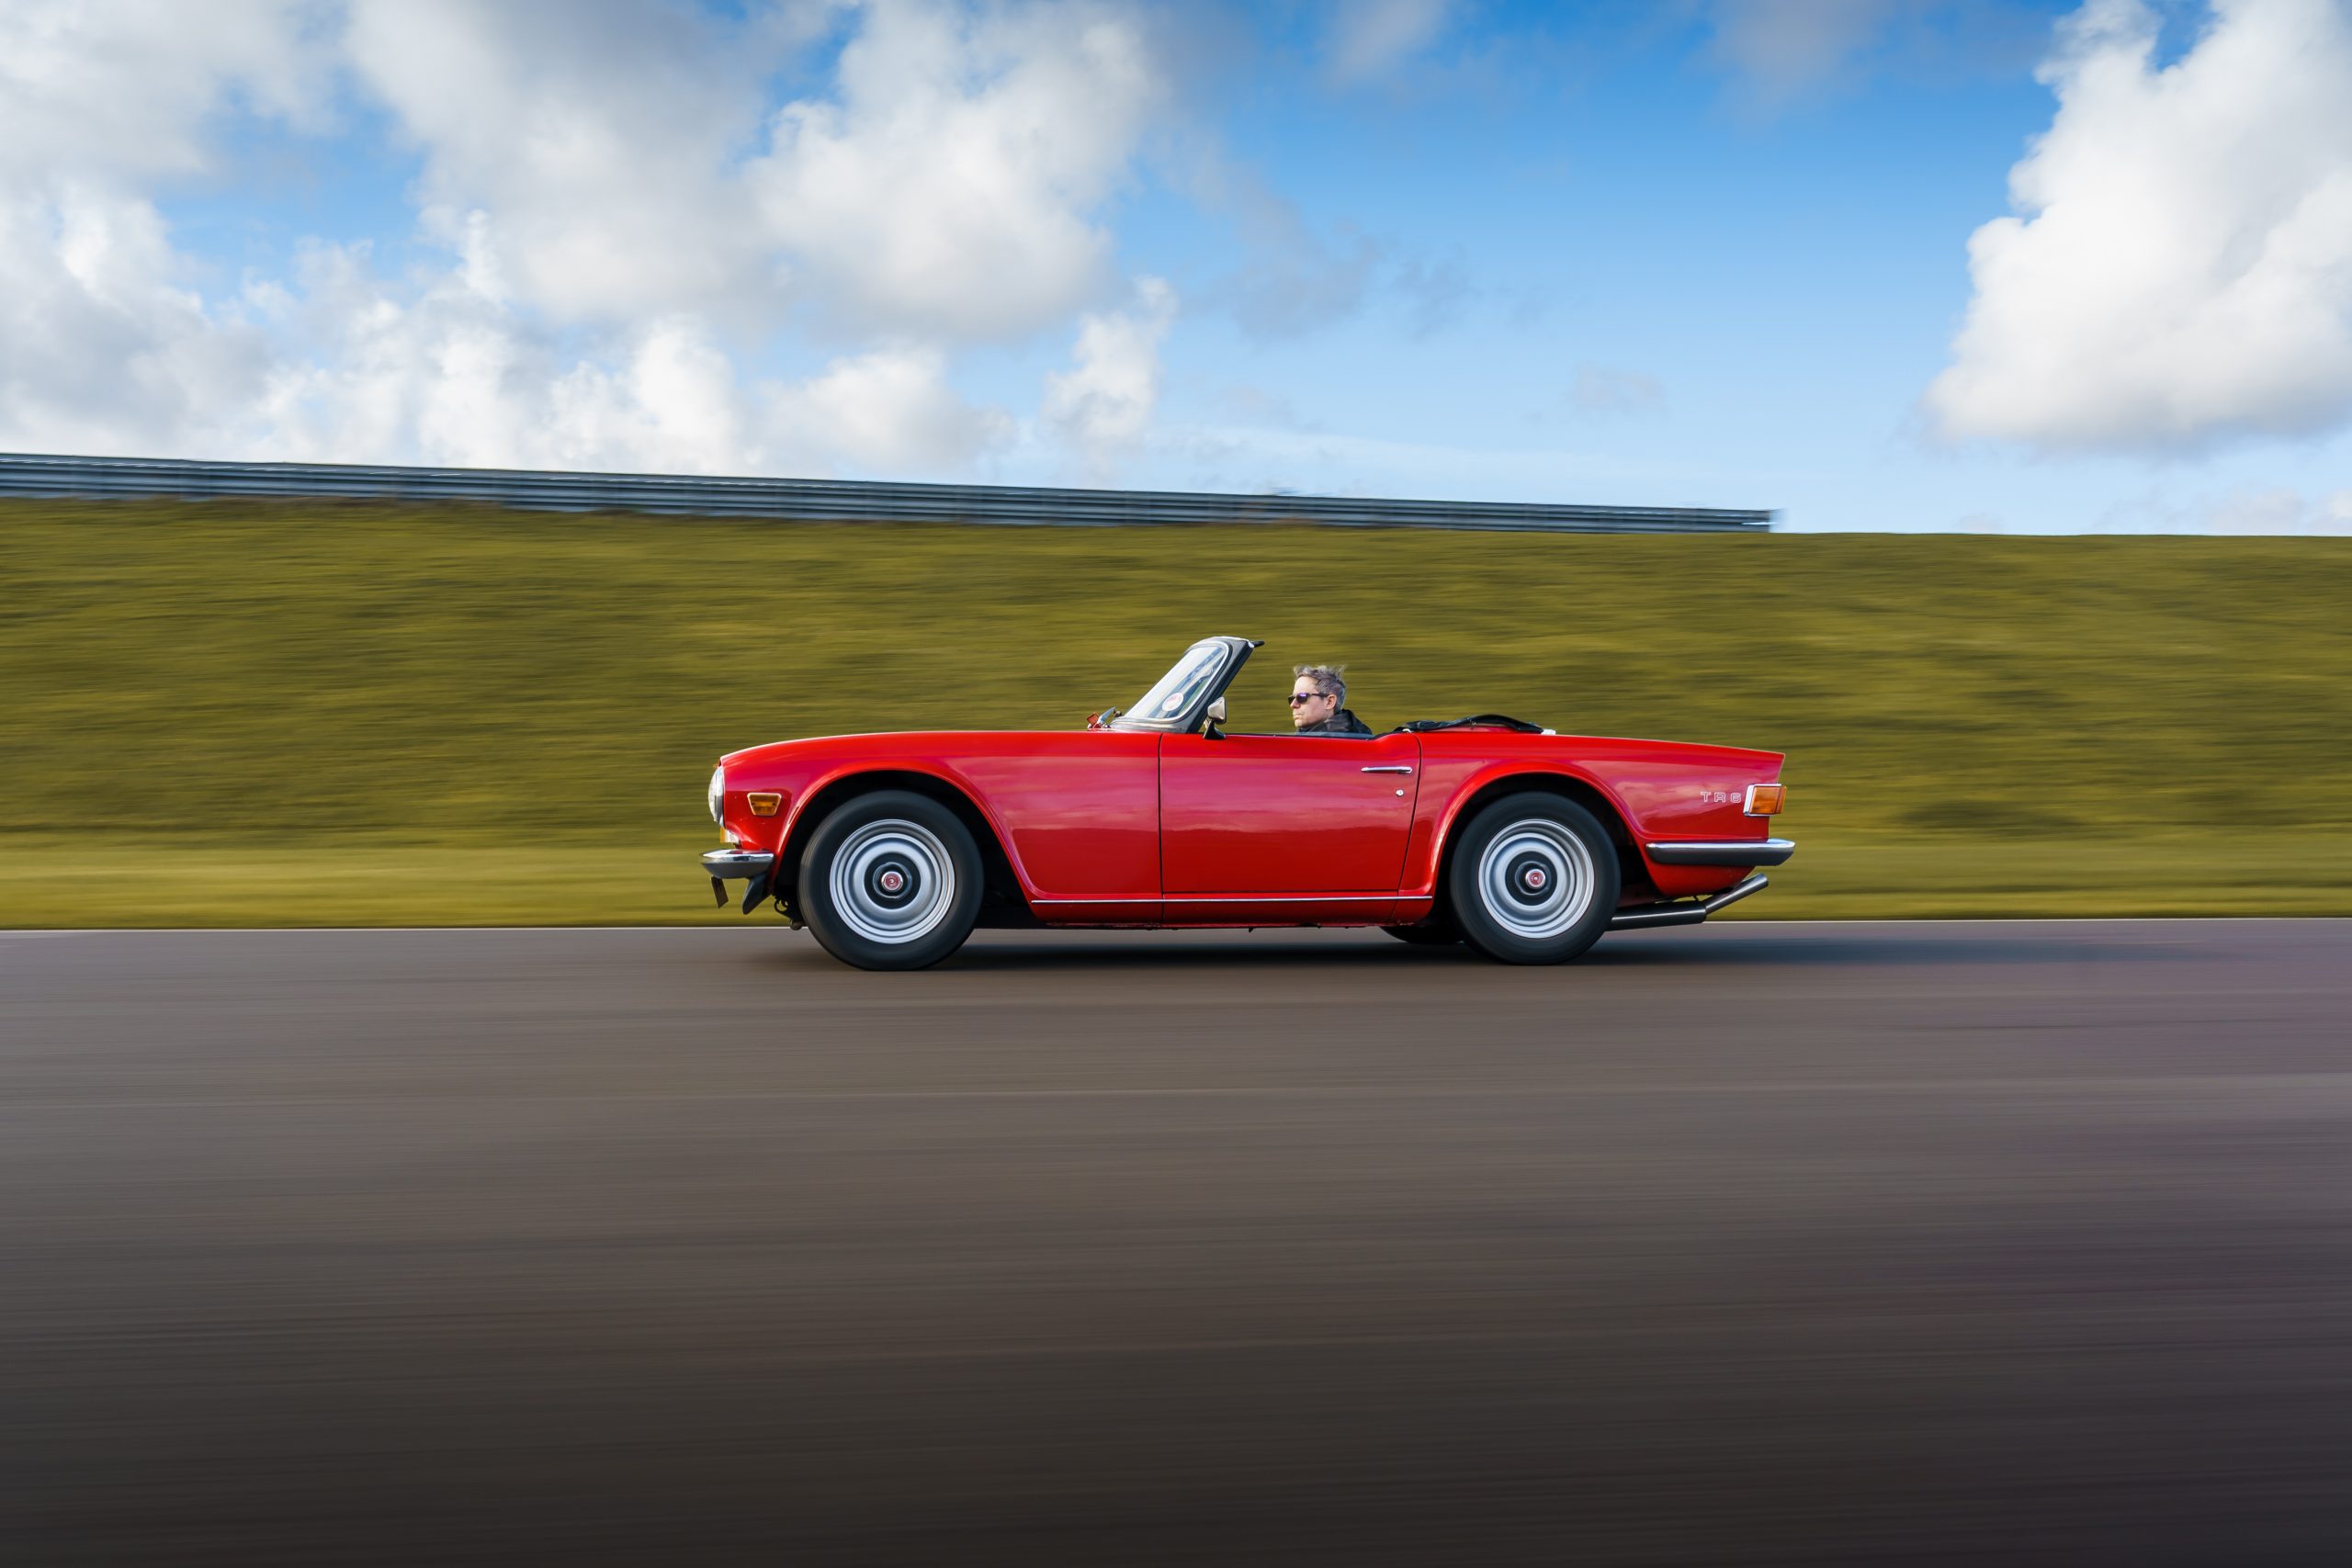 Triumph TR6 video: “Just seeing and hearing it wins a lot of admirers” | Hagerty UK Bull Market List